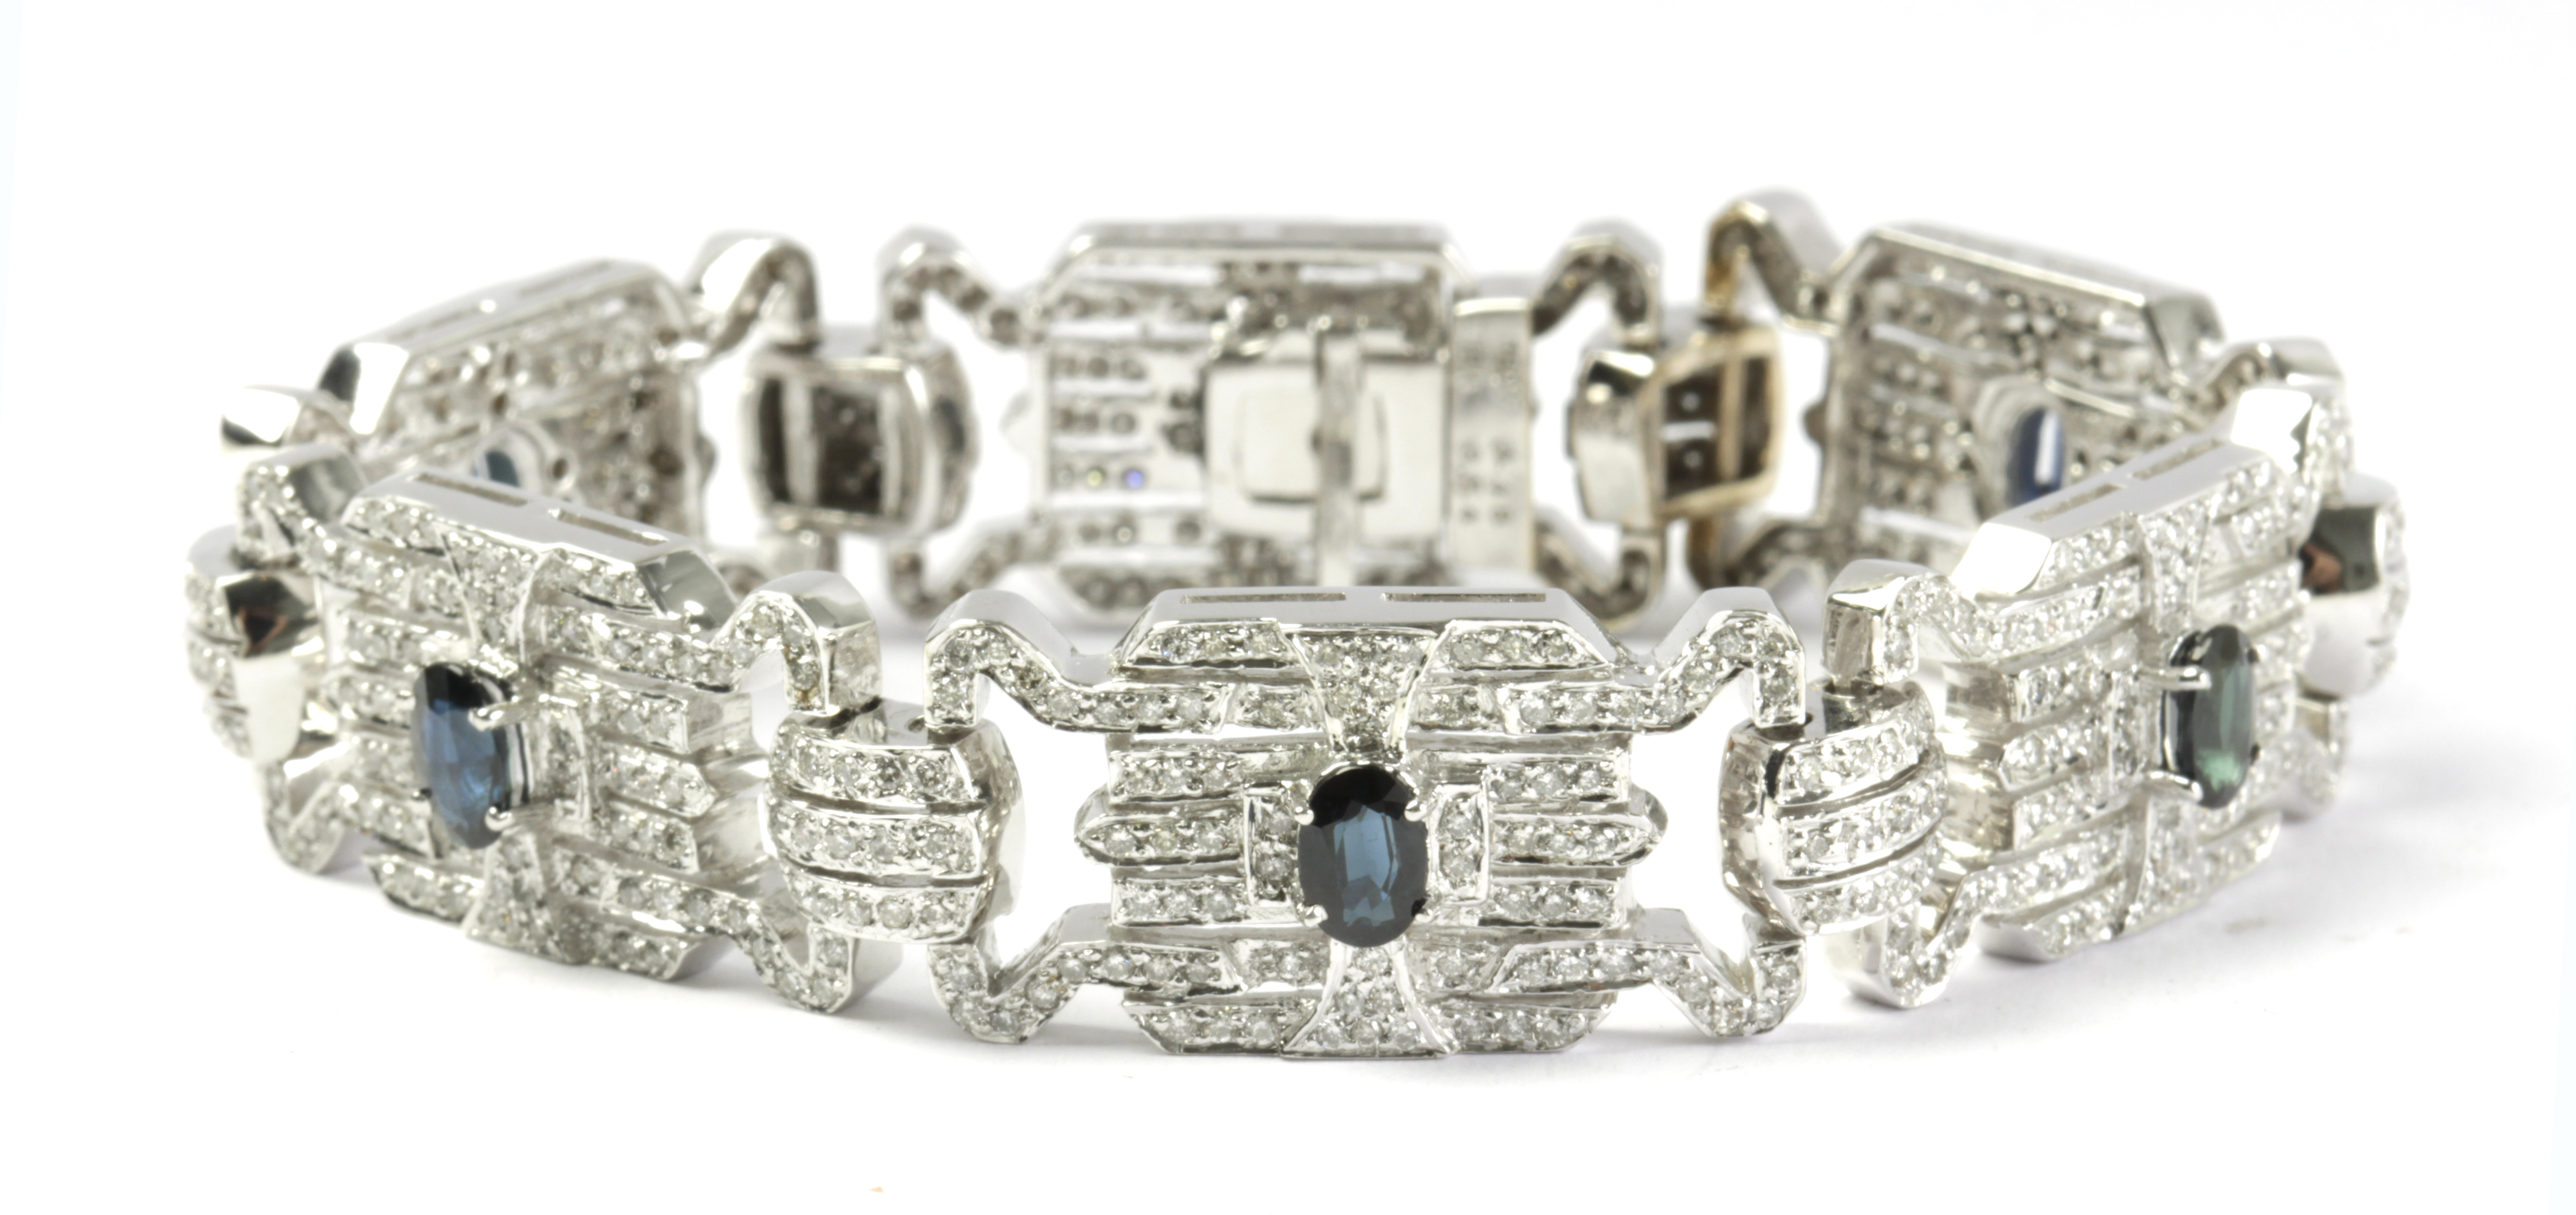 An Art-Déco style bracelet with a geometric pattern in 18k. white gold, sapphires and diamonds - Image 2 of 2